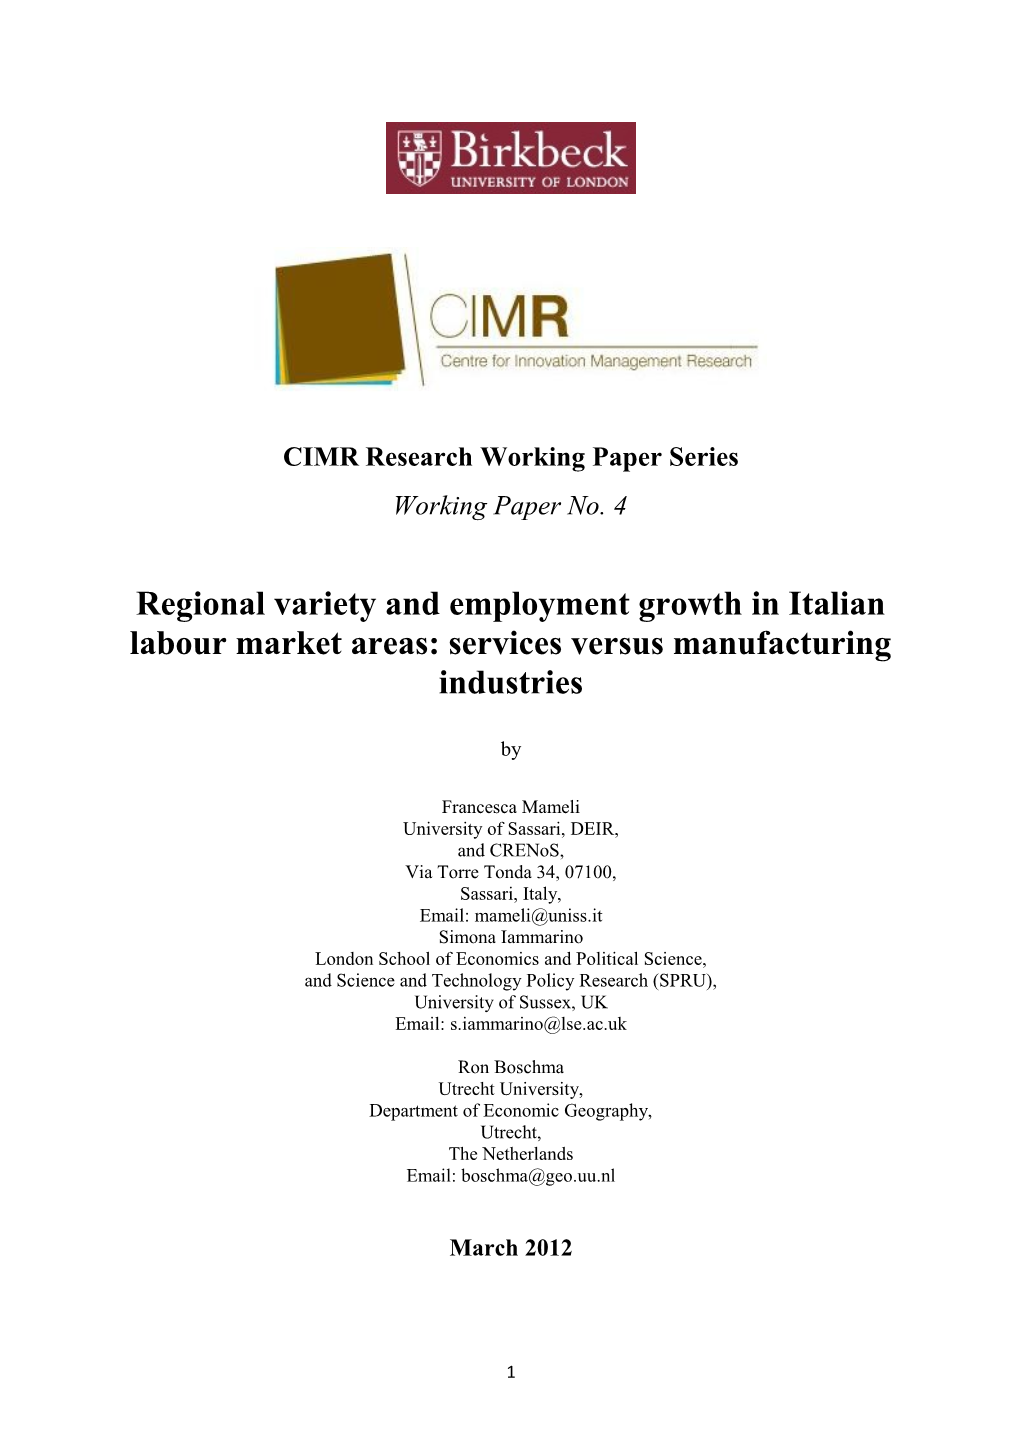 Regional Variety and Employment Growth in Italian Labour Market Systems: Services Versus